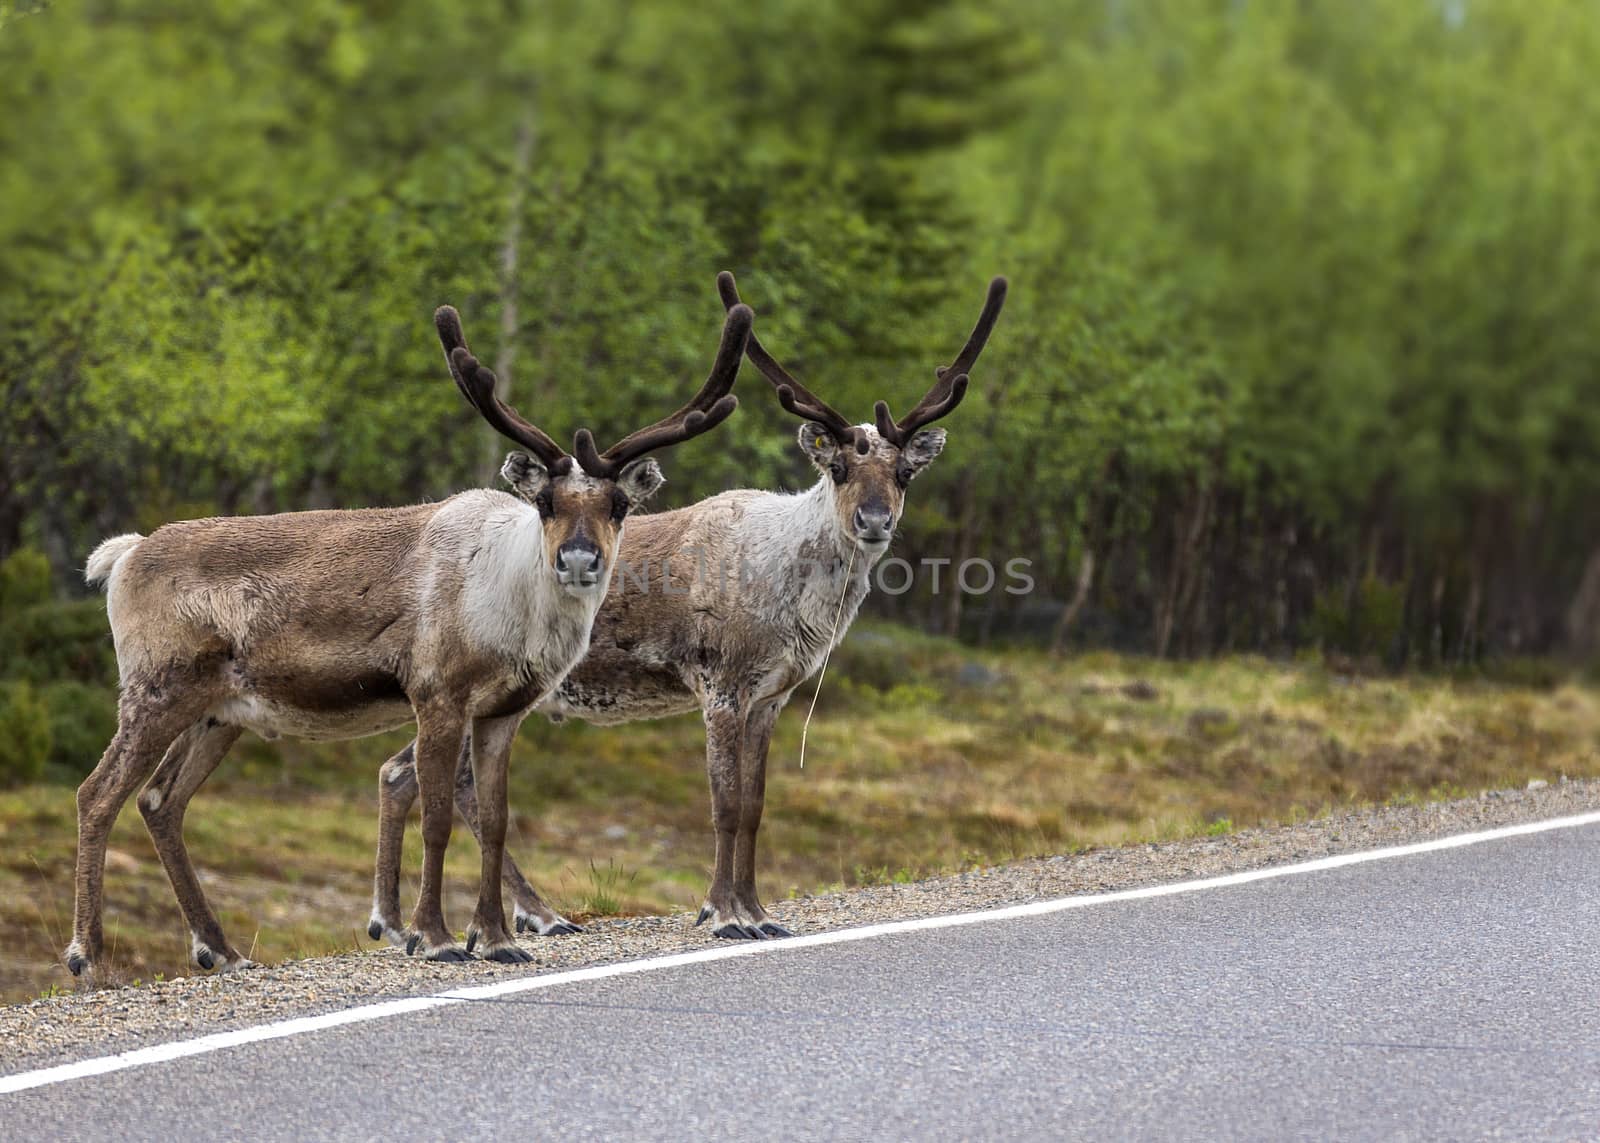 Two reindeer ready to cross the road in Lapland. by Claudine